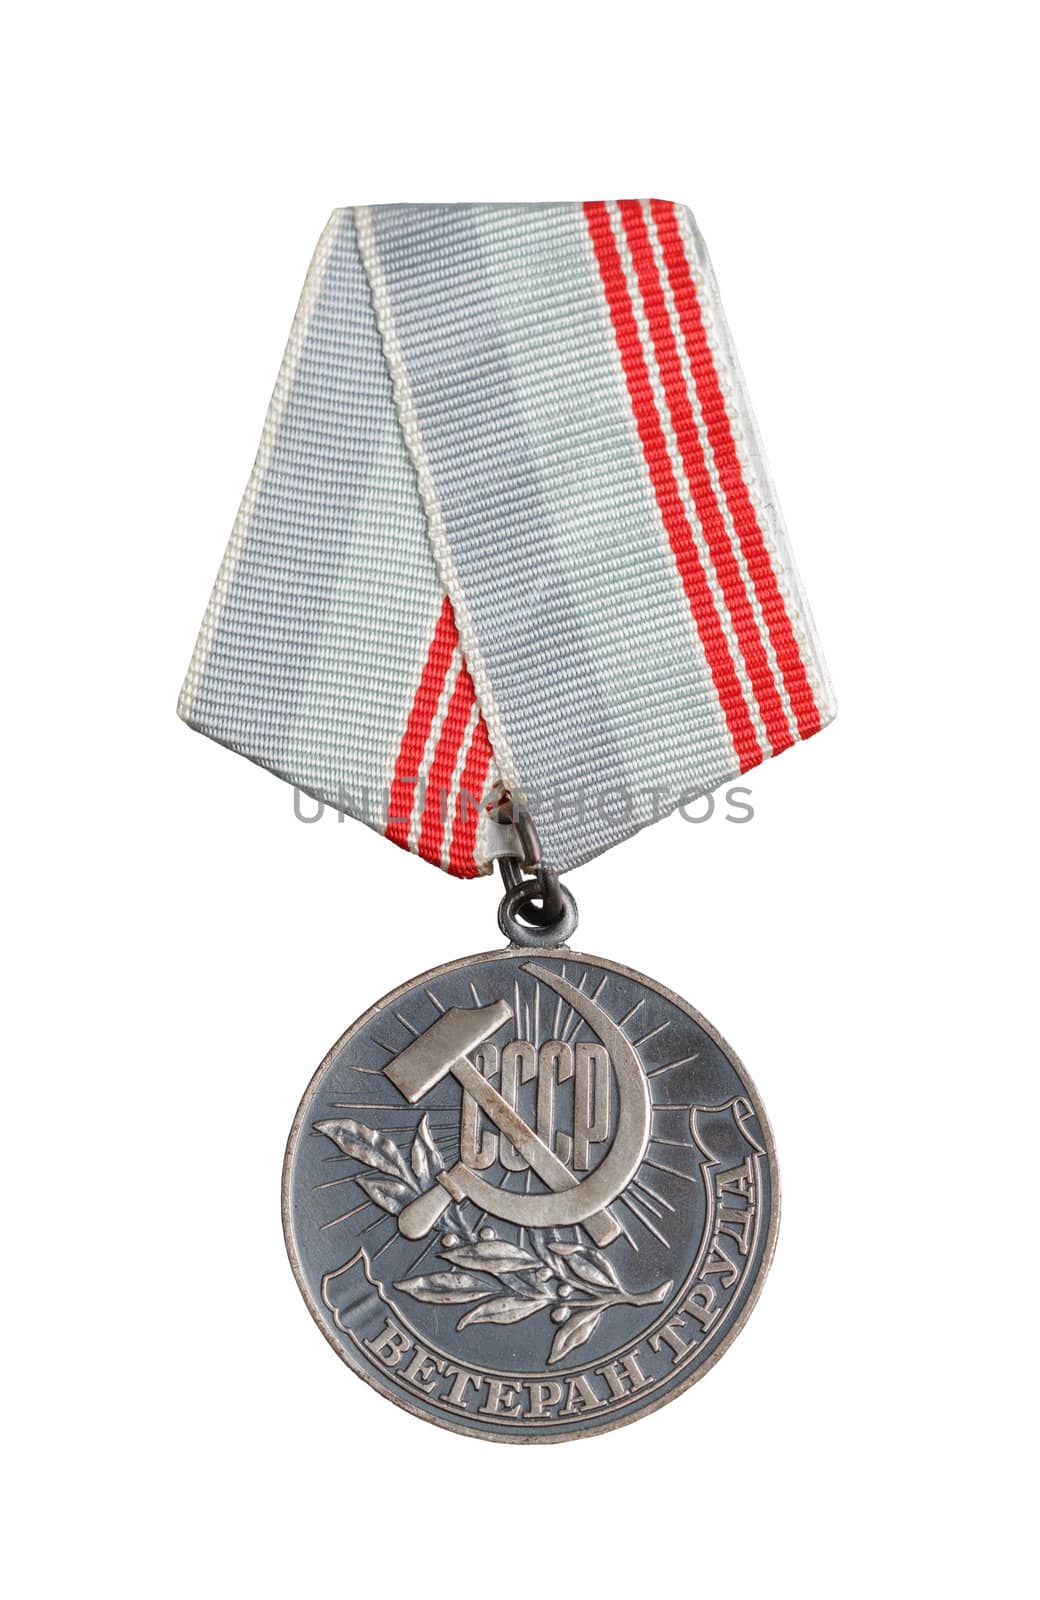 Russian medal close up by Roka